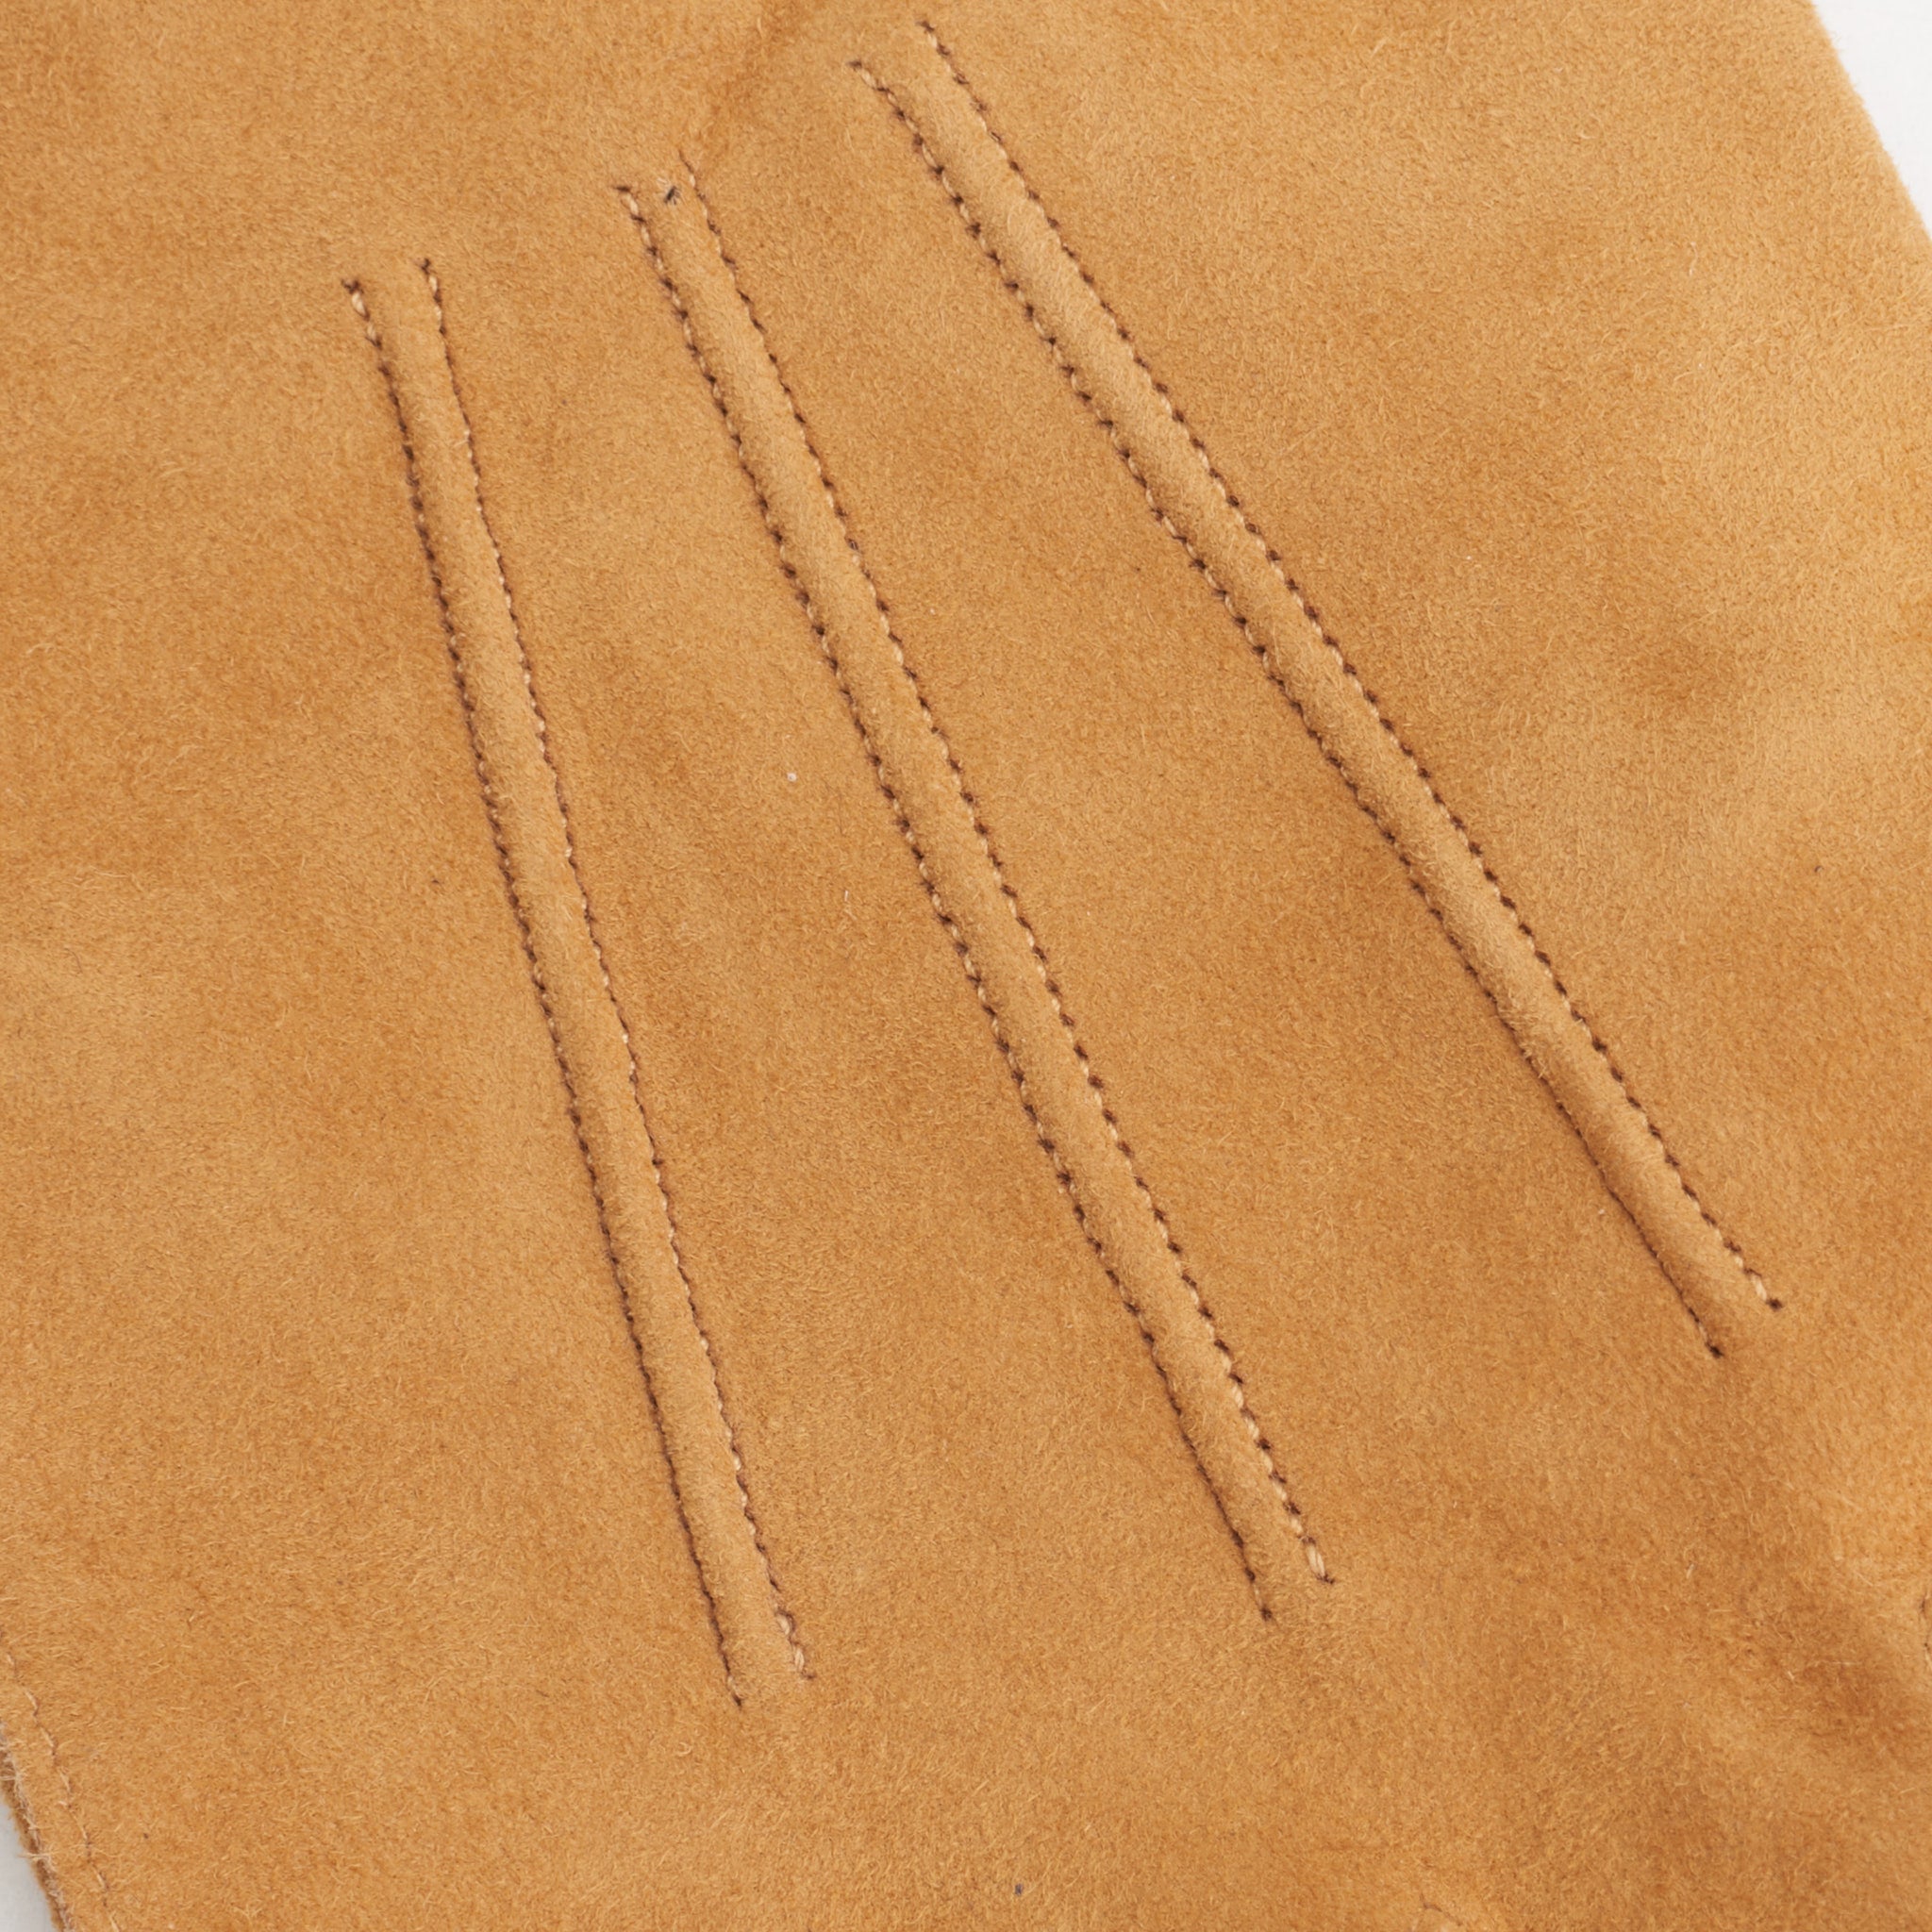 SERMONETA Tan Suede Nappa Leather Unlined Classic Gloves Size 8